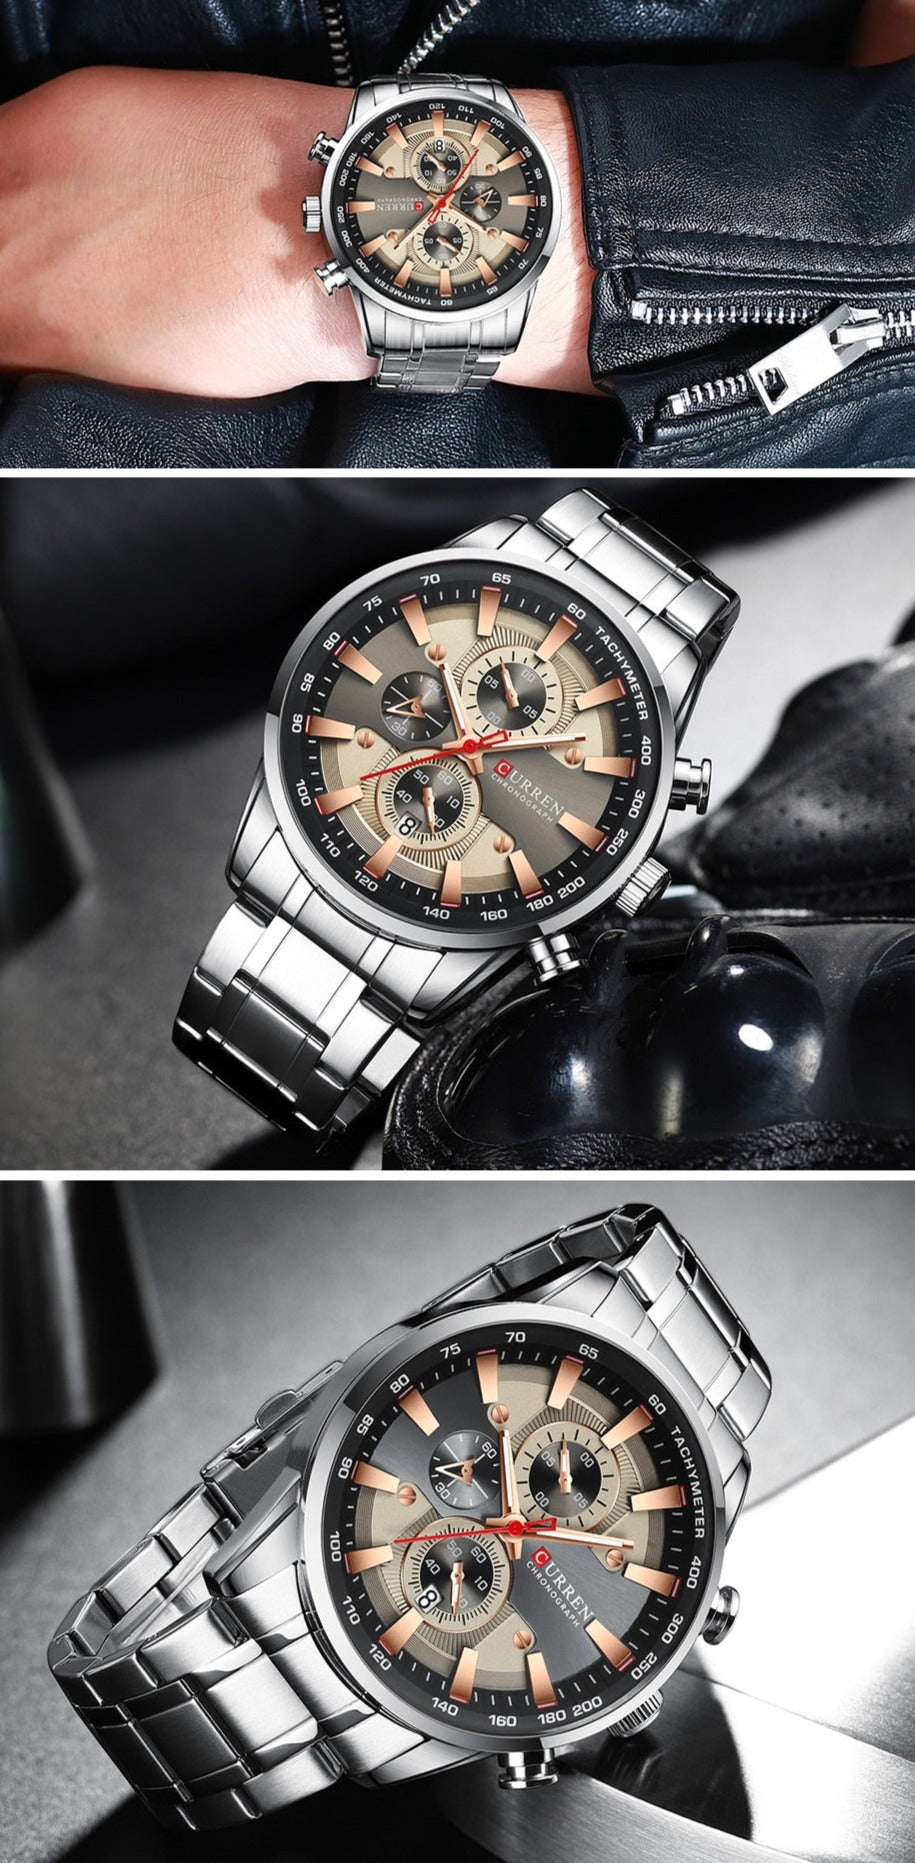 Black Curren Model 8351 Quartz Sport Chronograph Stainless Steel Watch available from FiveTo.co.uk